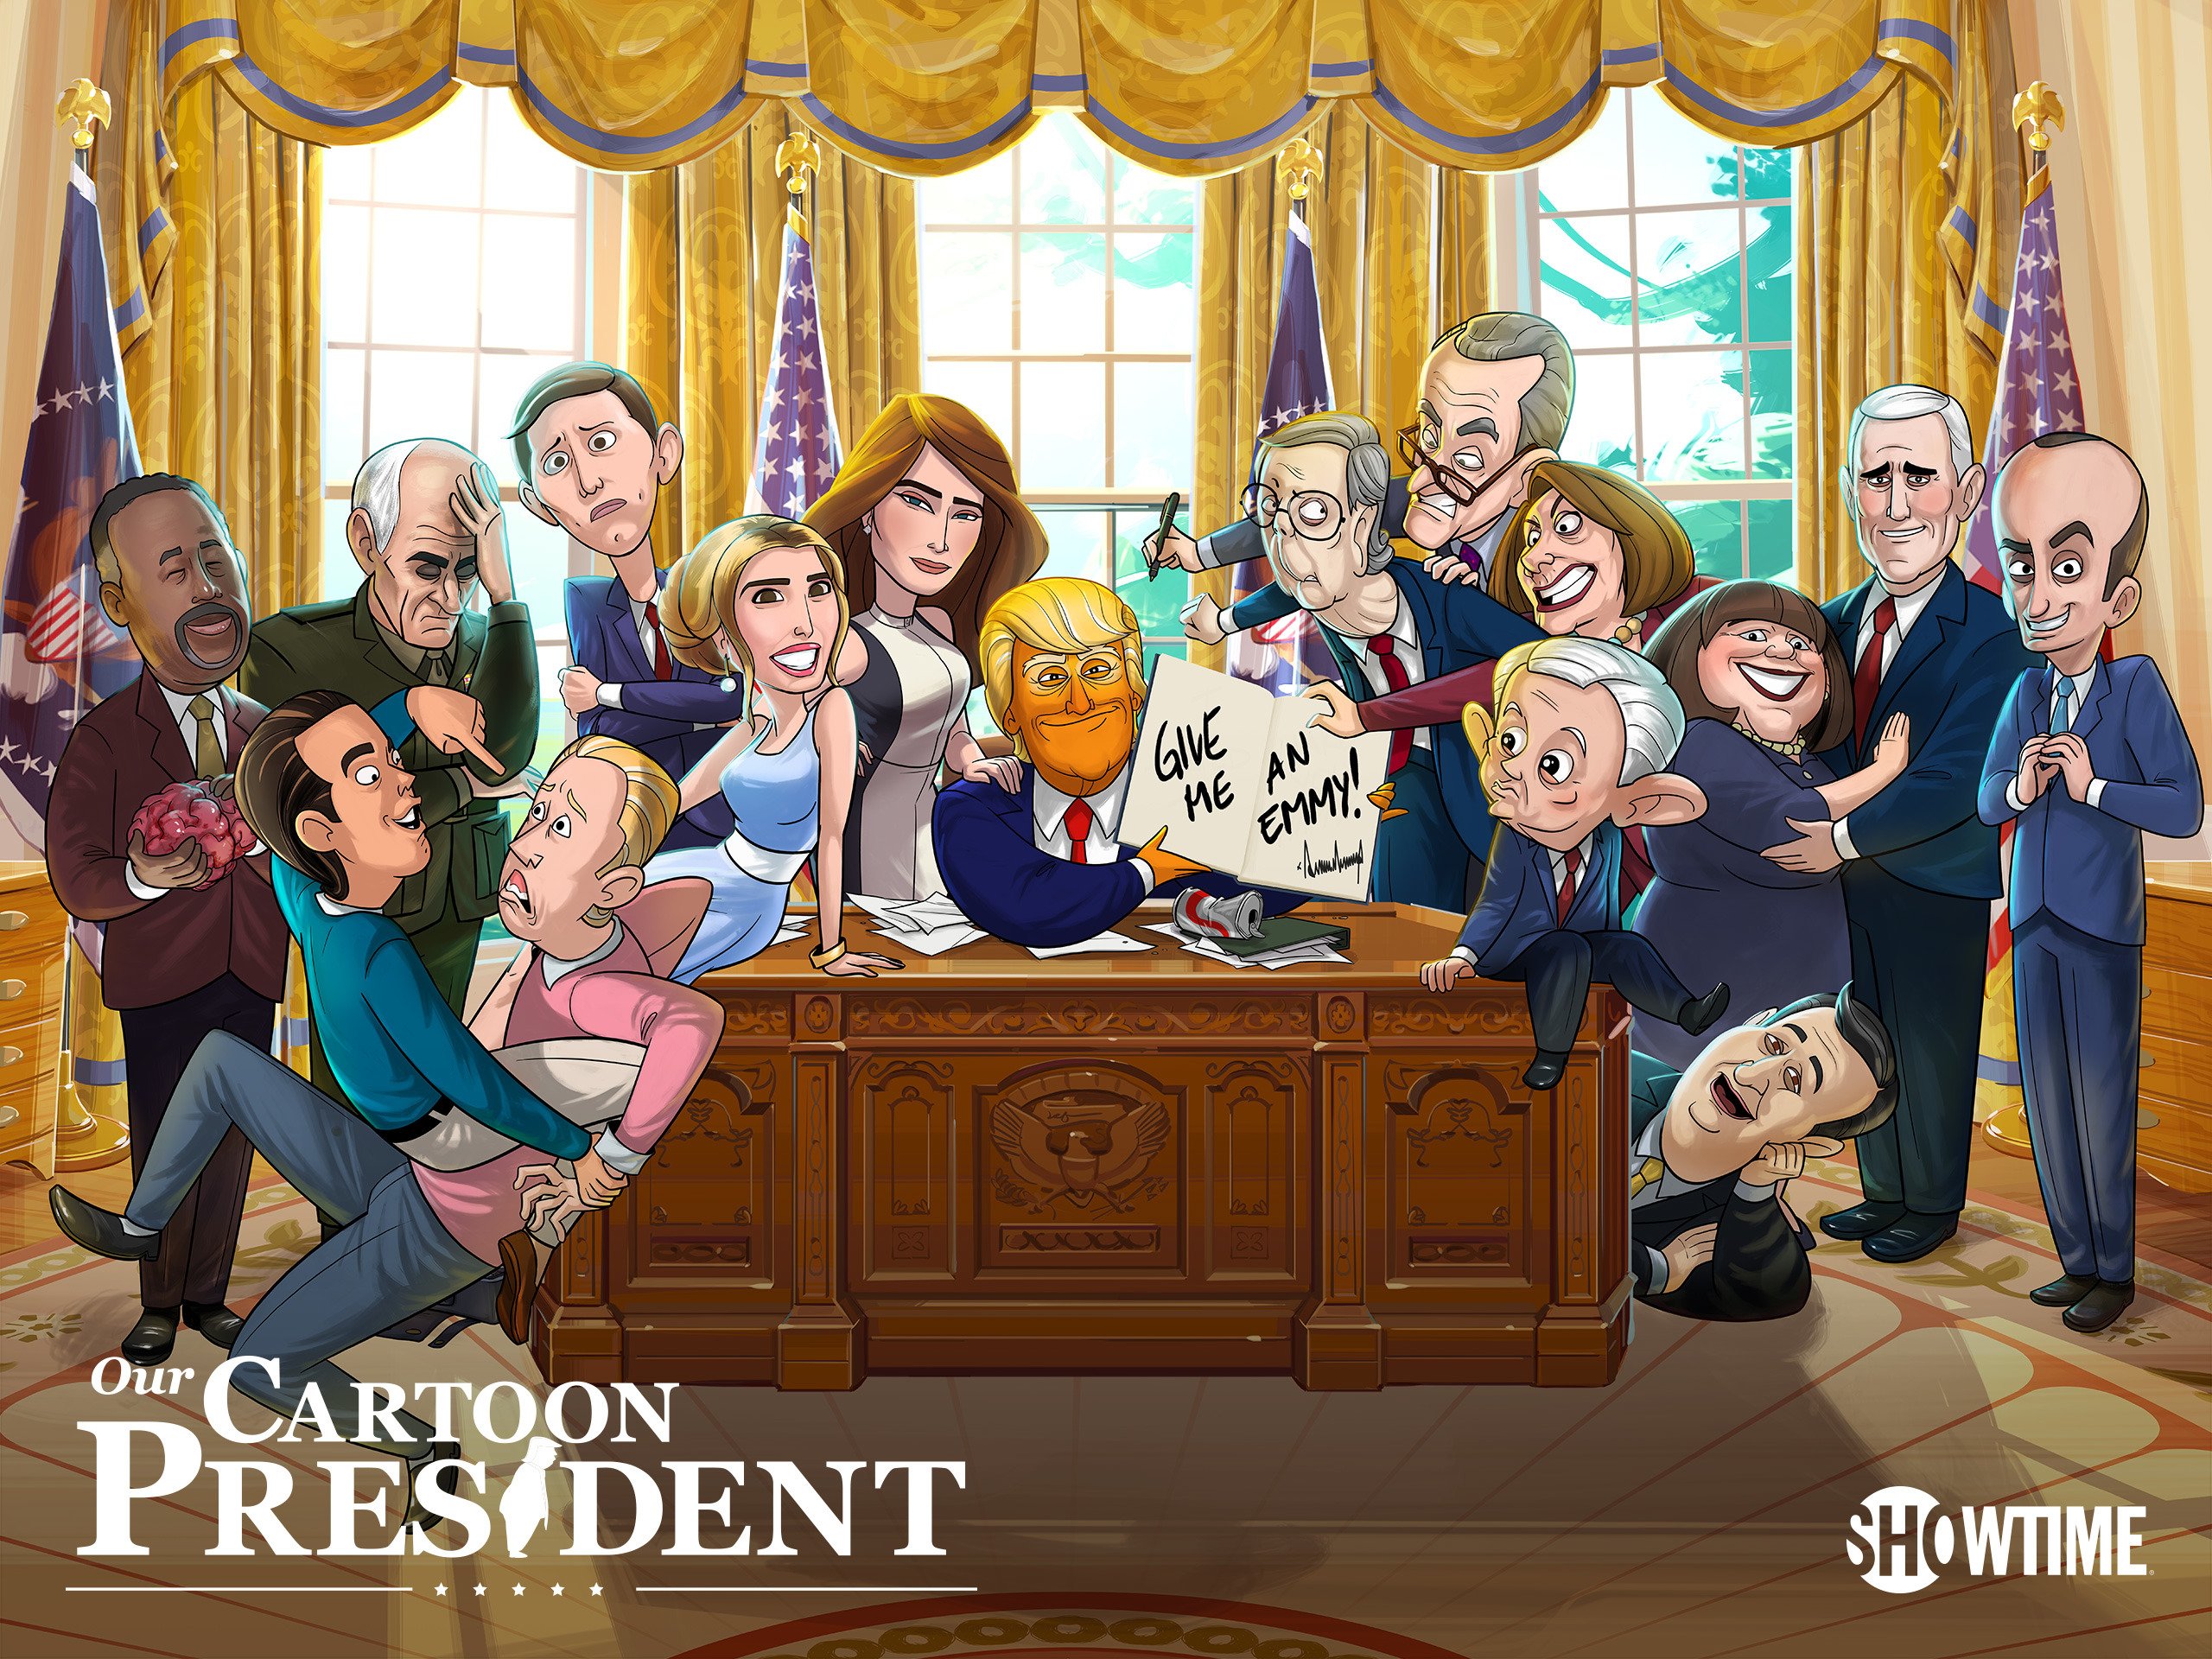 Our Cartoon President on Showtime